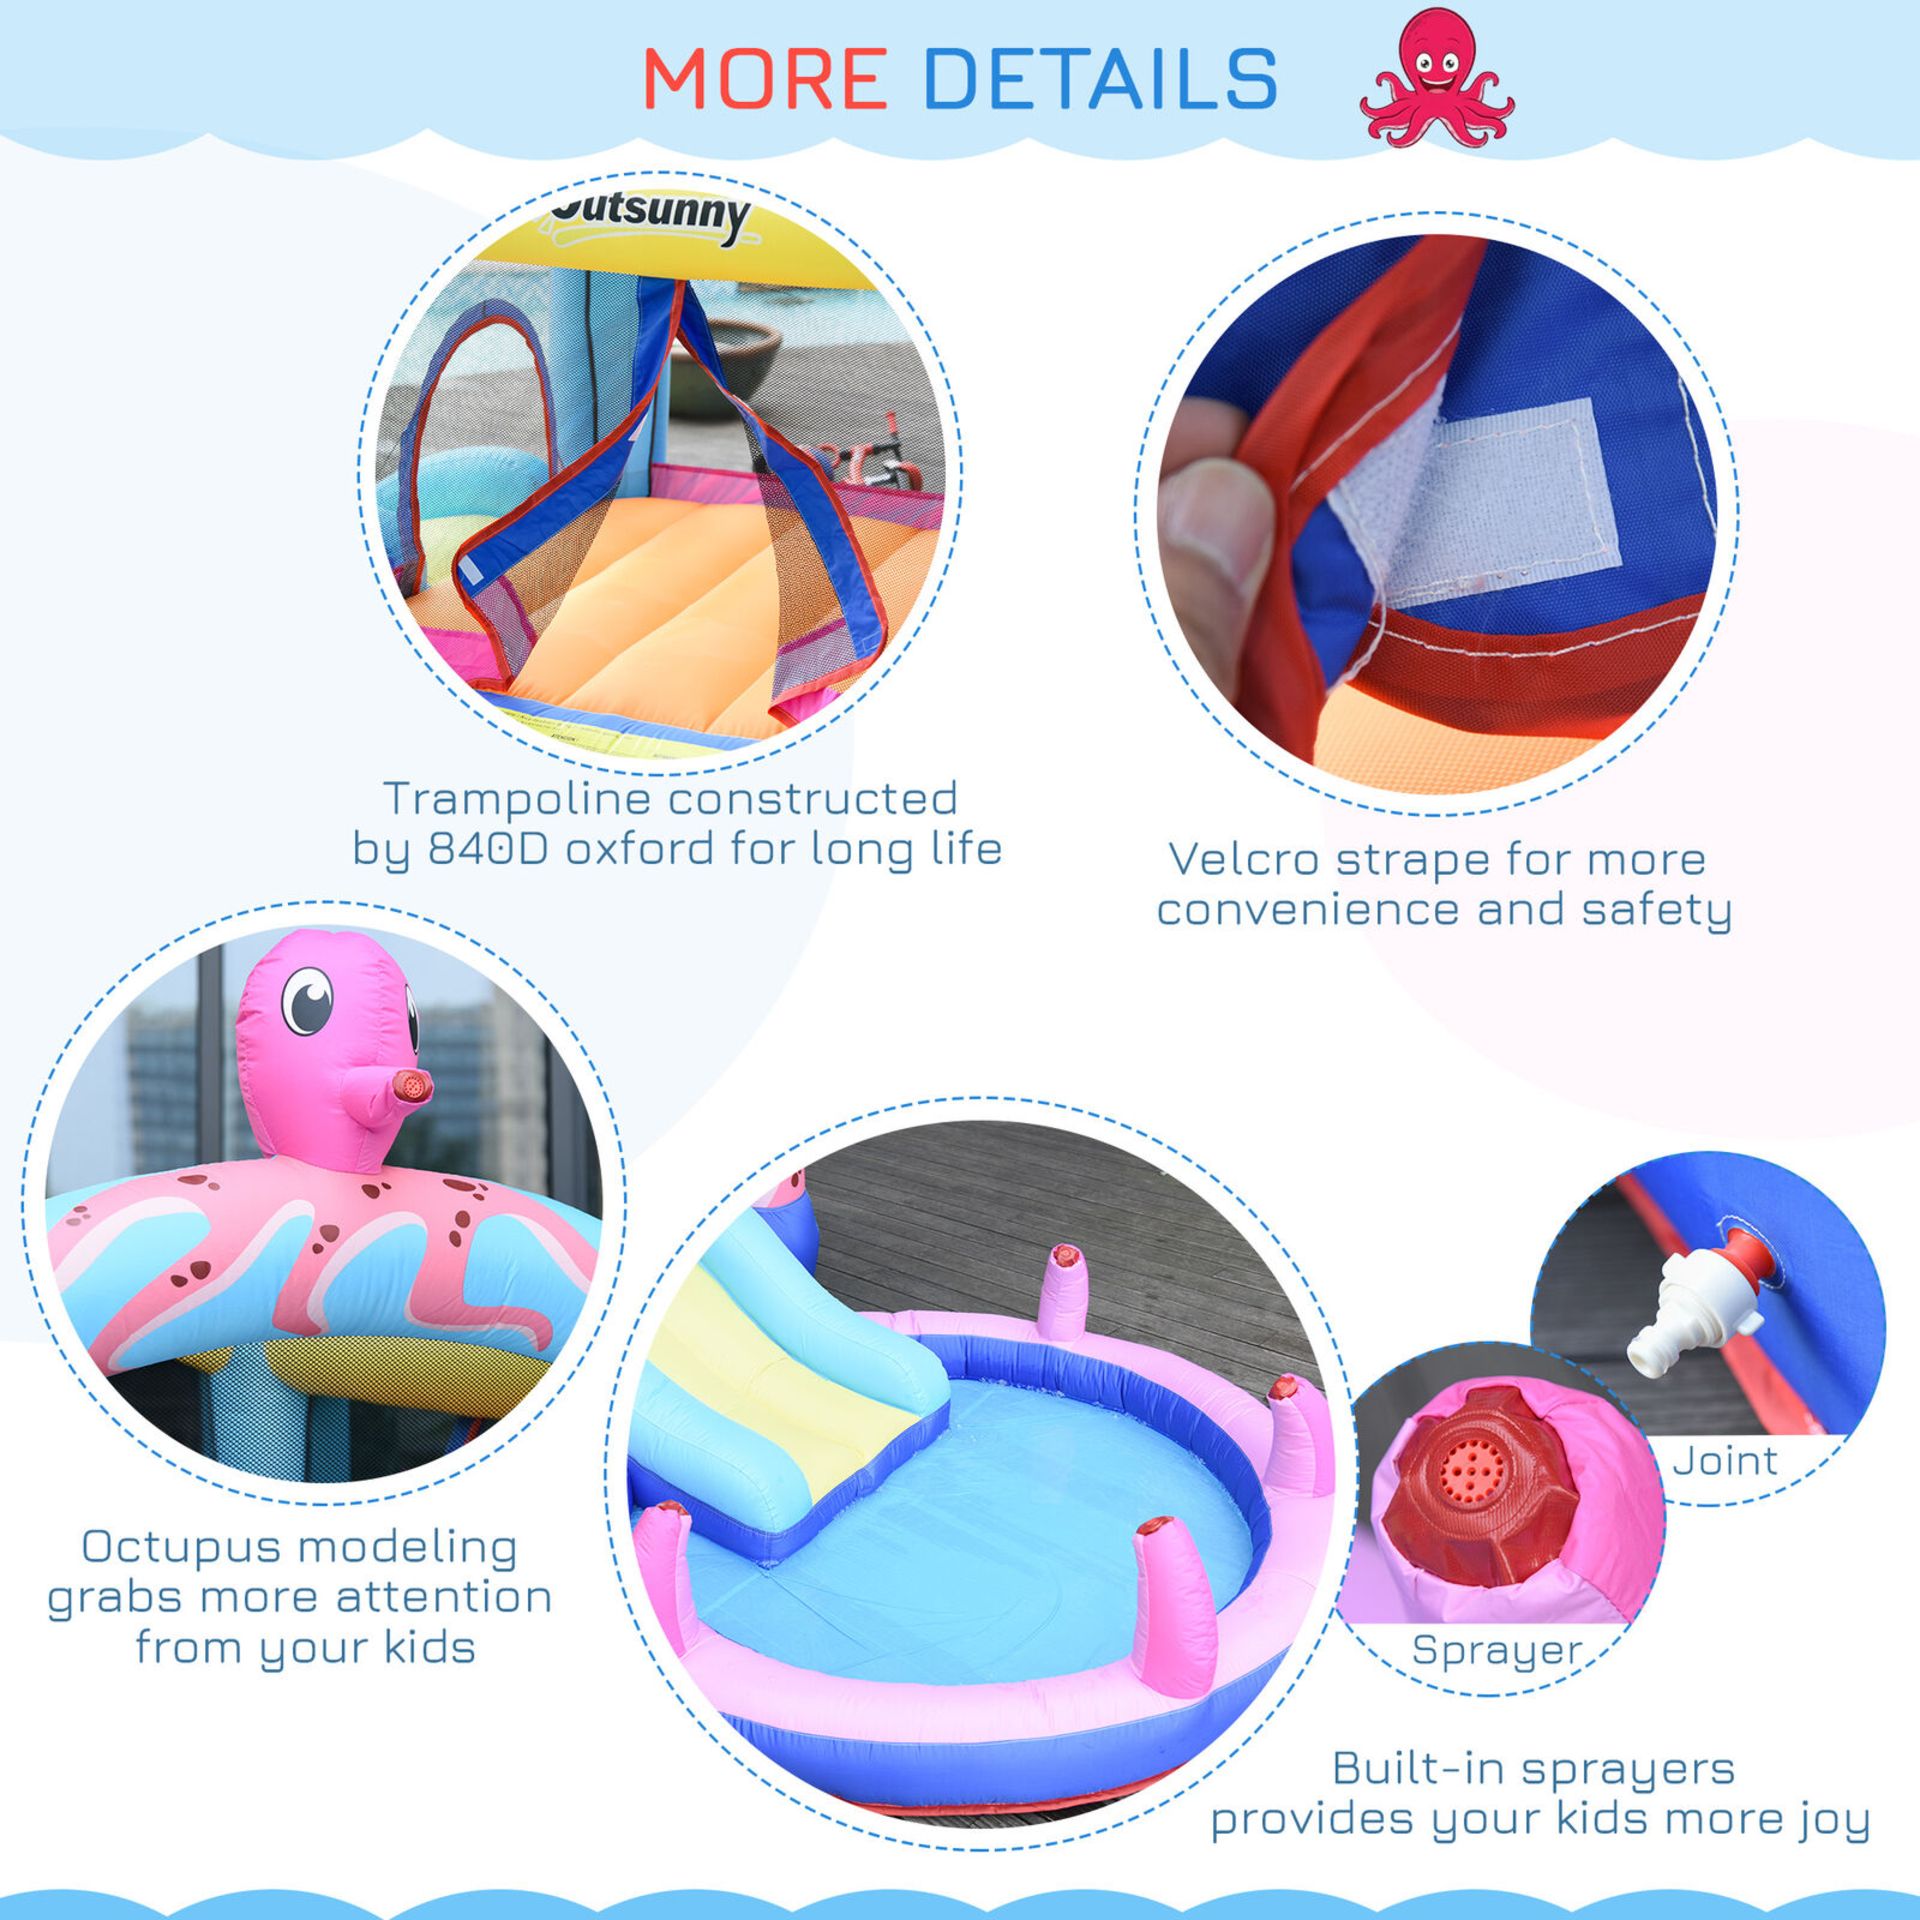 NEW WATER SLIDE BOUNCY CASTLE WITH POOL INCLUDES CARRYBAG AND BLOWER - Image 2 of 5